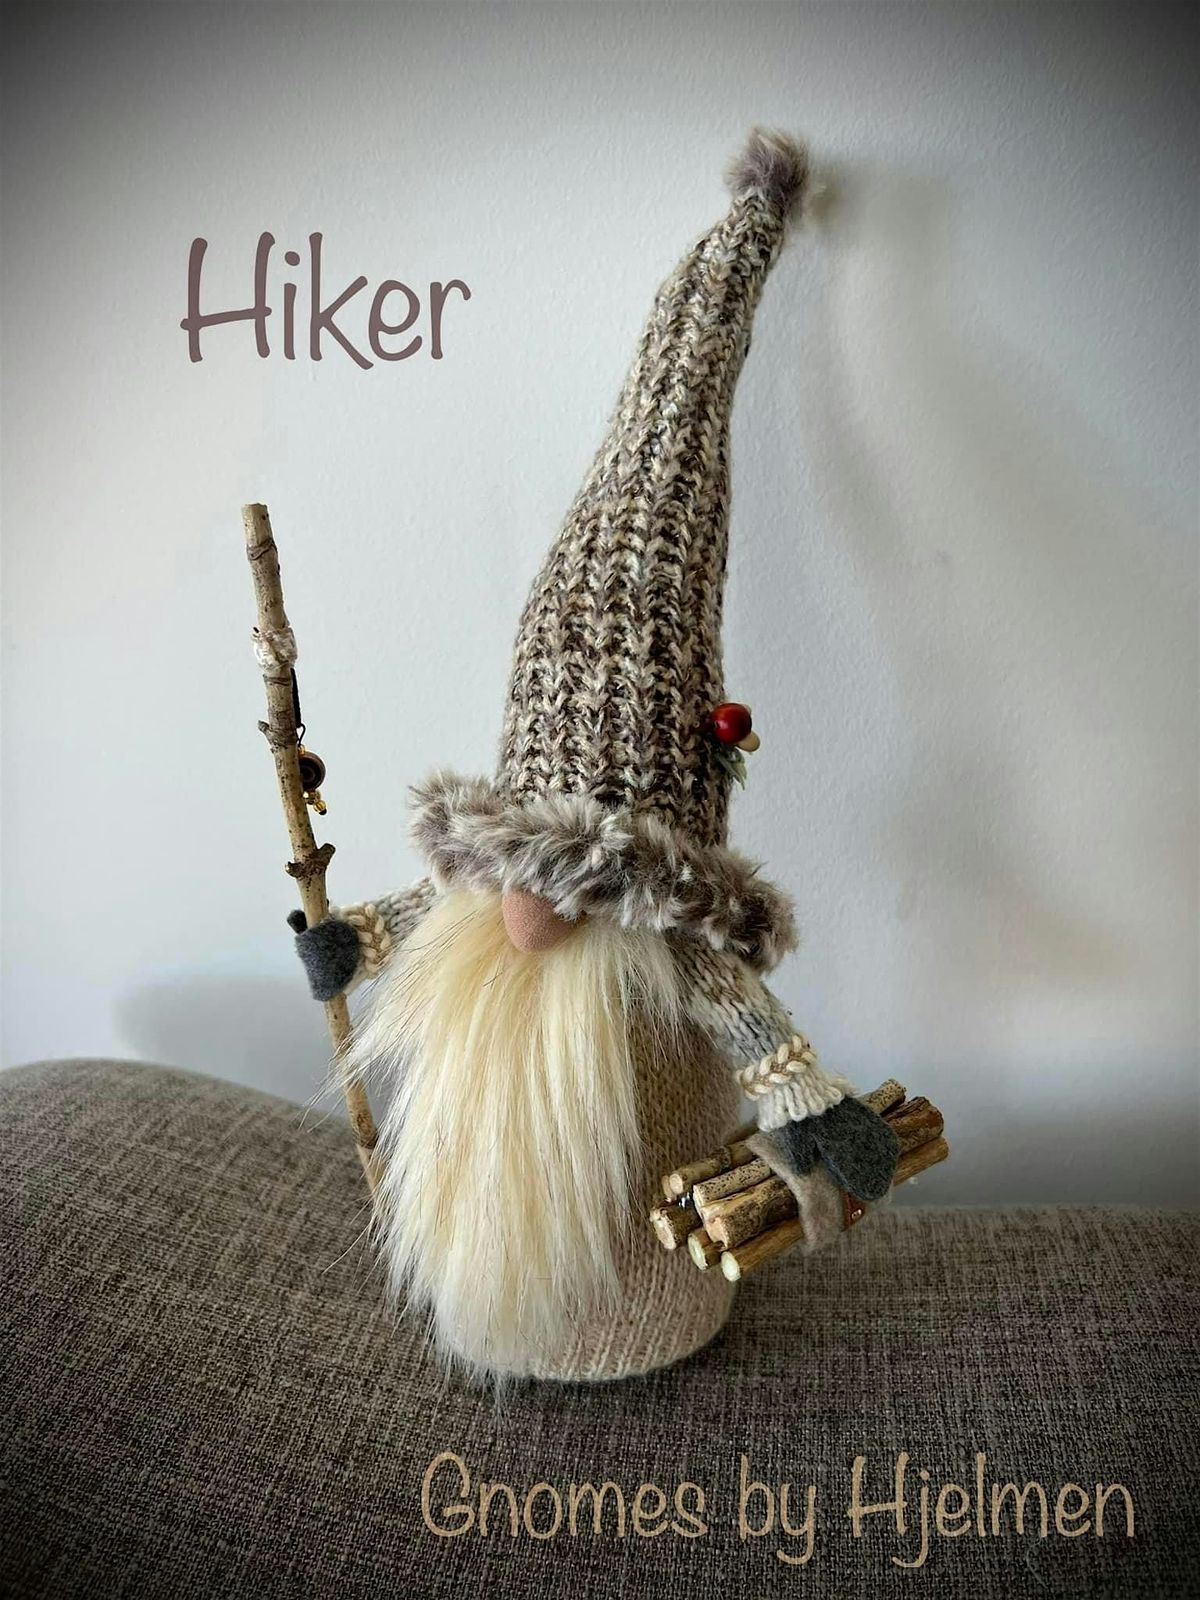 Make a Recycled Gnome with Lynn Hjelman - the hiking gnome